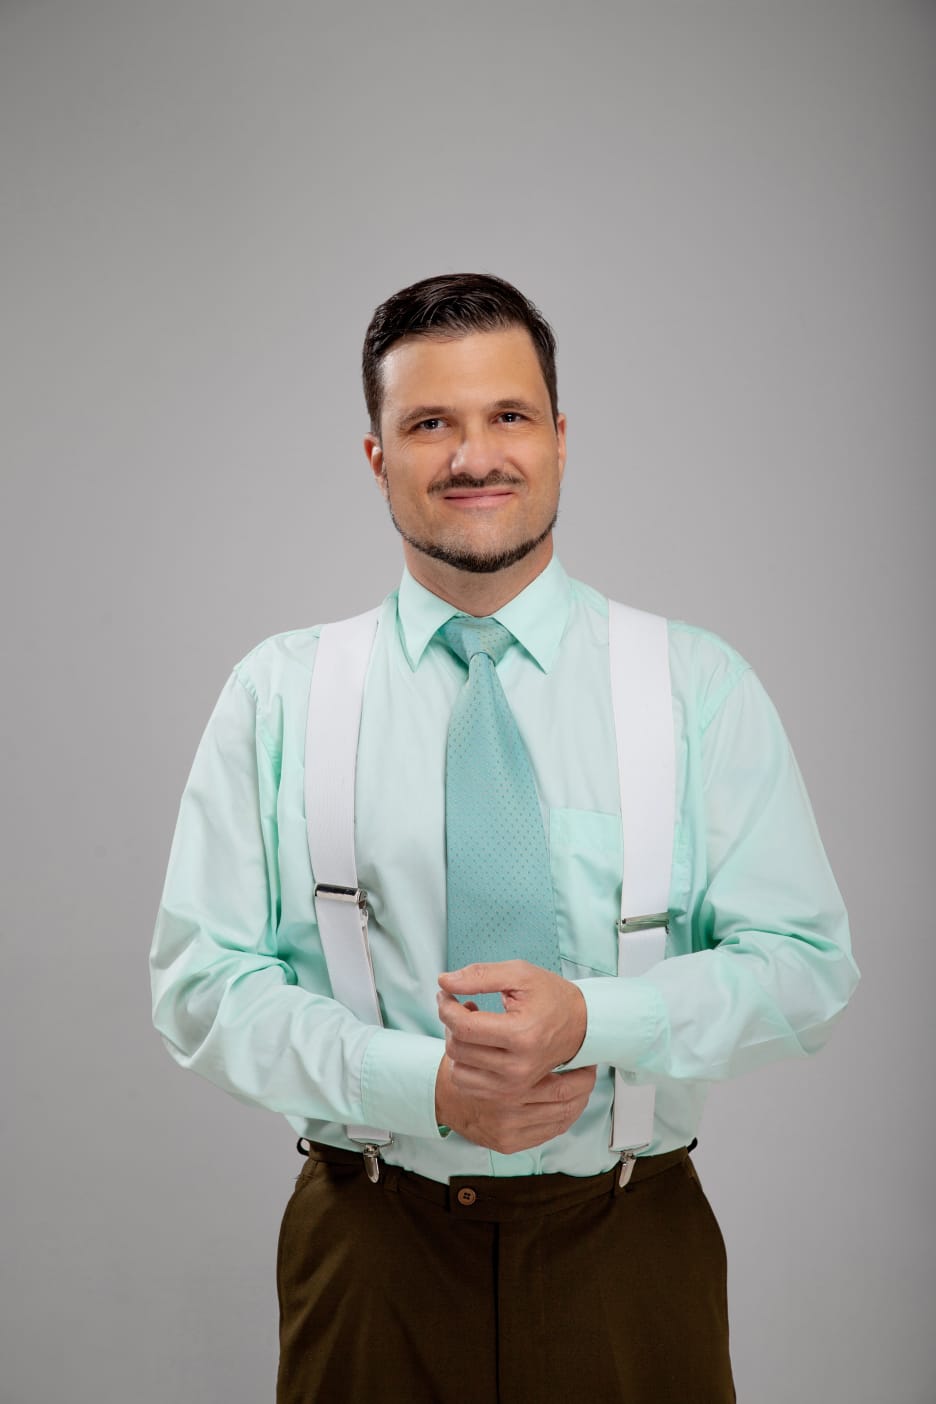 Man in a light blue shirt and tie smiles at the camera with a grey background.